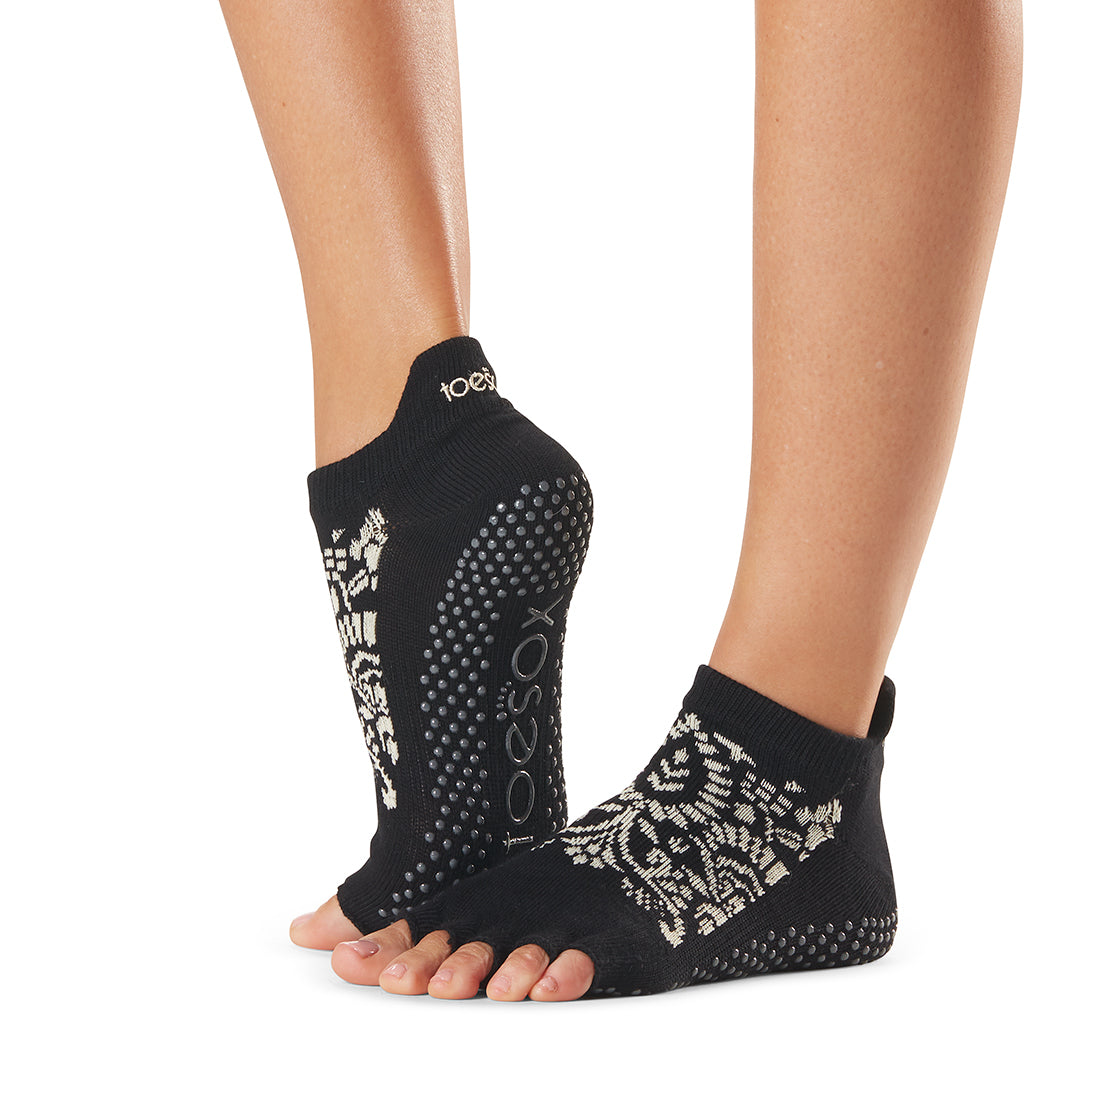 ToeSox - Full Toe Low Rise Grip Socks - SPRING 2021 - T8 Fitness - Asia  Yoga, Pilates, Rehab, Fitness Products